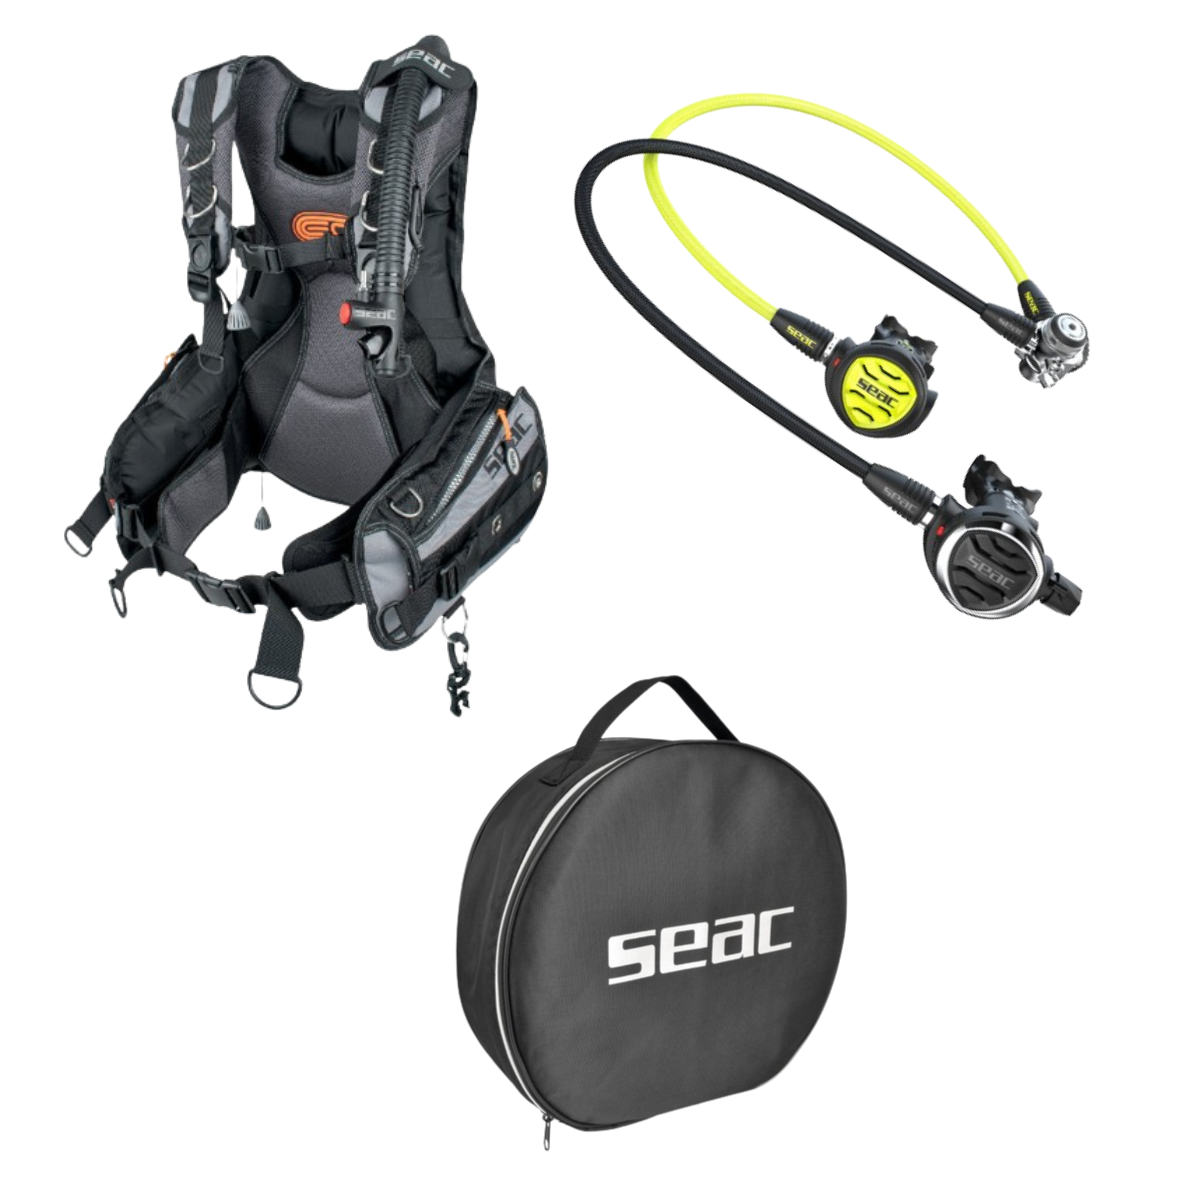 EQ PRO Dive Instructor Seac IT 500 Regulator Set with EQ PRO BCD Value Dive Package